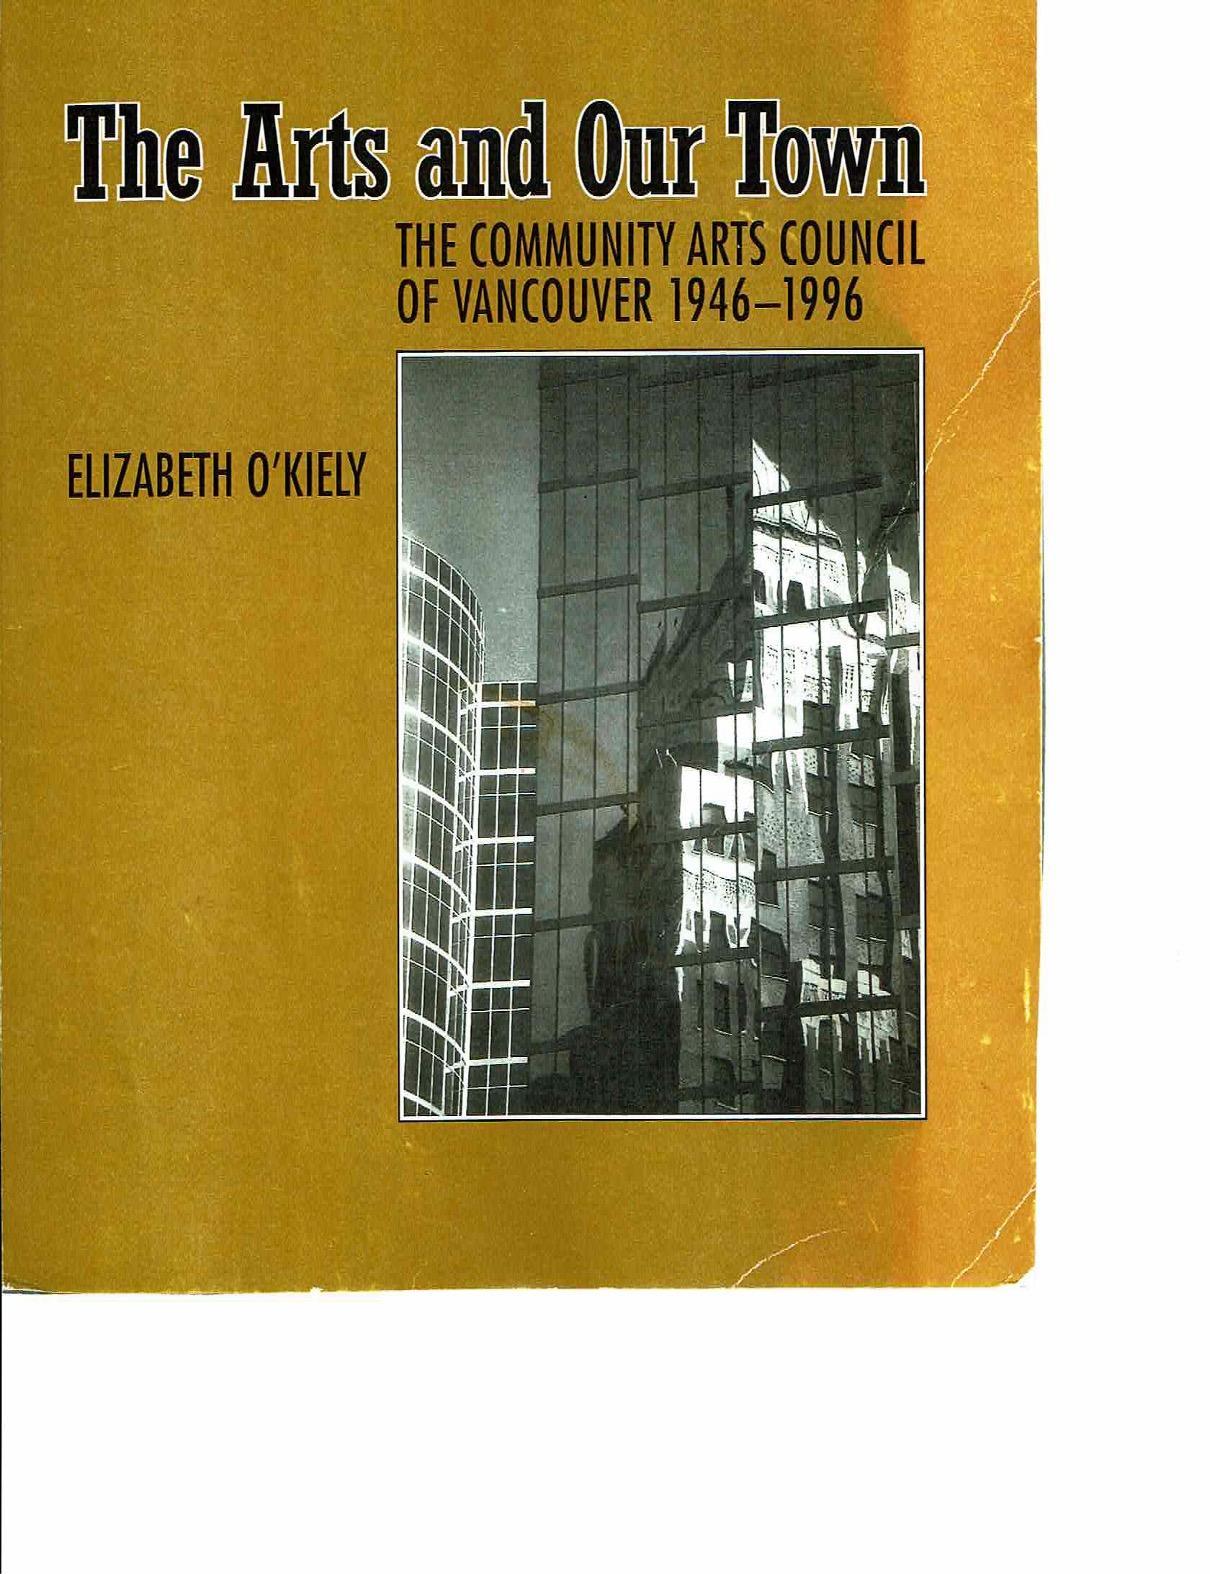 Title page of the Arts and Our Town book. Yellow background with an greyed image of a building on the right. Text reads: The Arts and Our Town The Community Arts Council of Vancouver 1946-1996 Elizabeth O-Kiely